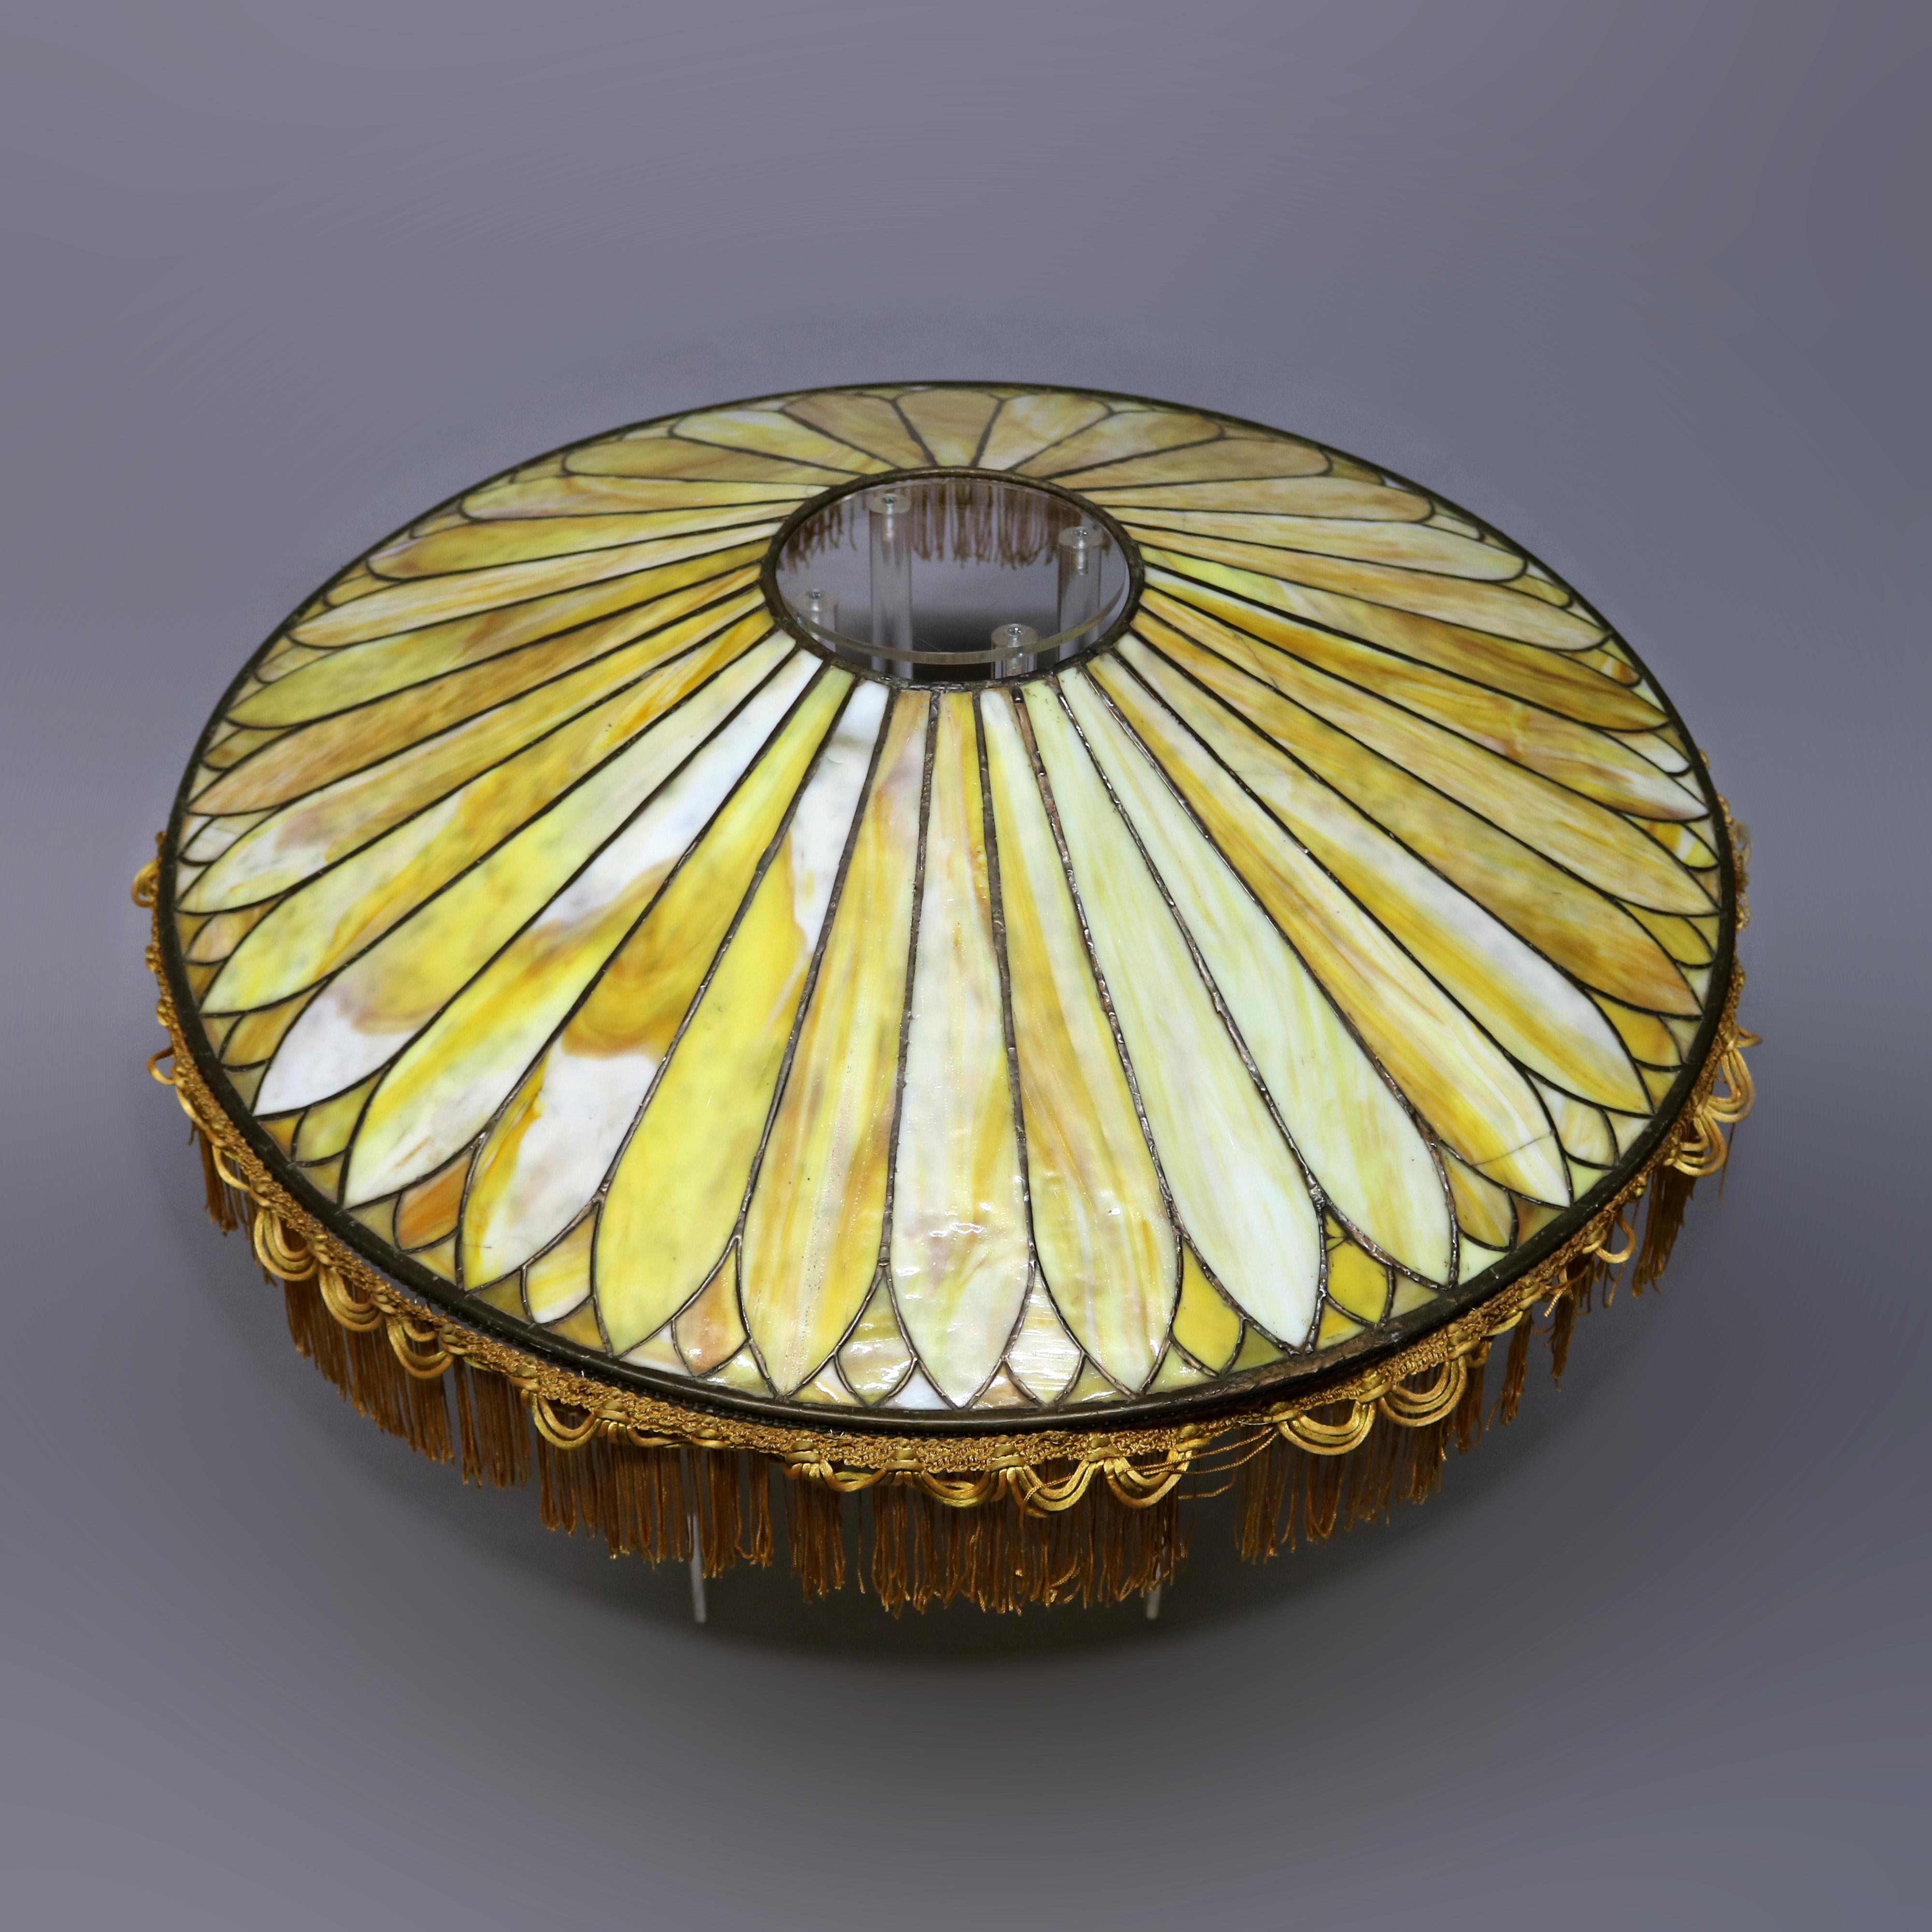 An antique oversized Arts & Crafts Prairie School lamp shade offers leaded slag glass construction in dome form with stylized petal design and fringed edge, circa 1910.

Measures: 6.5